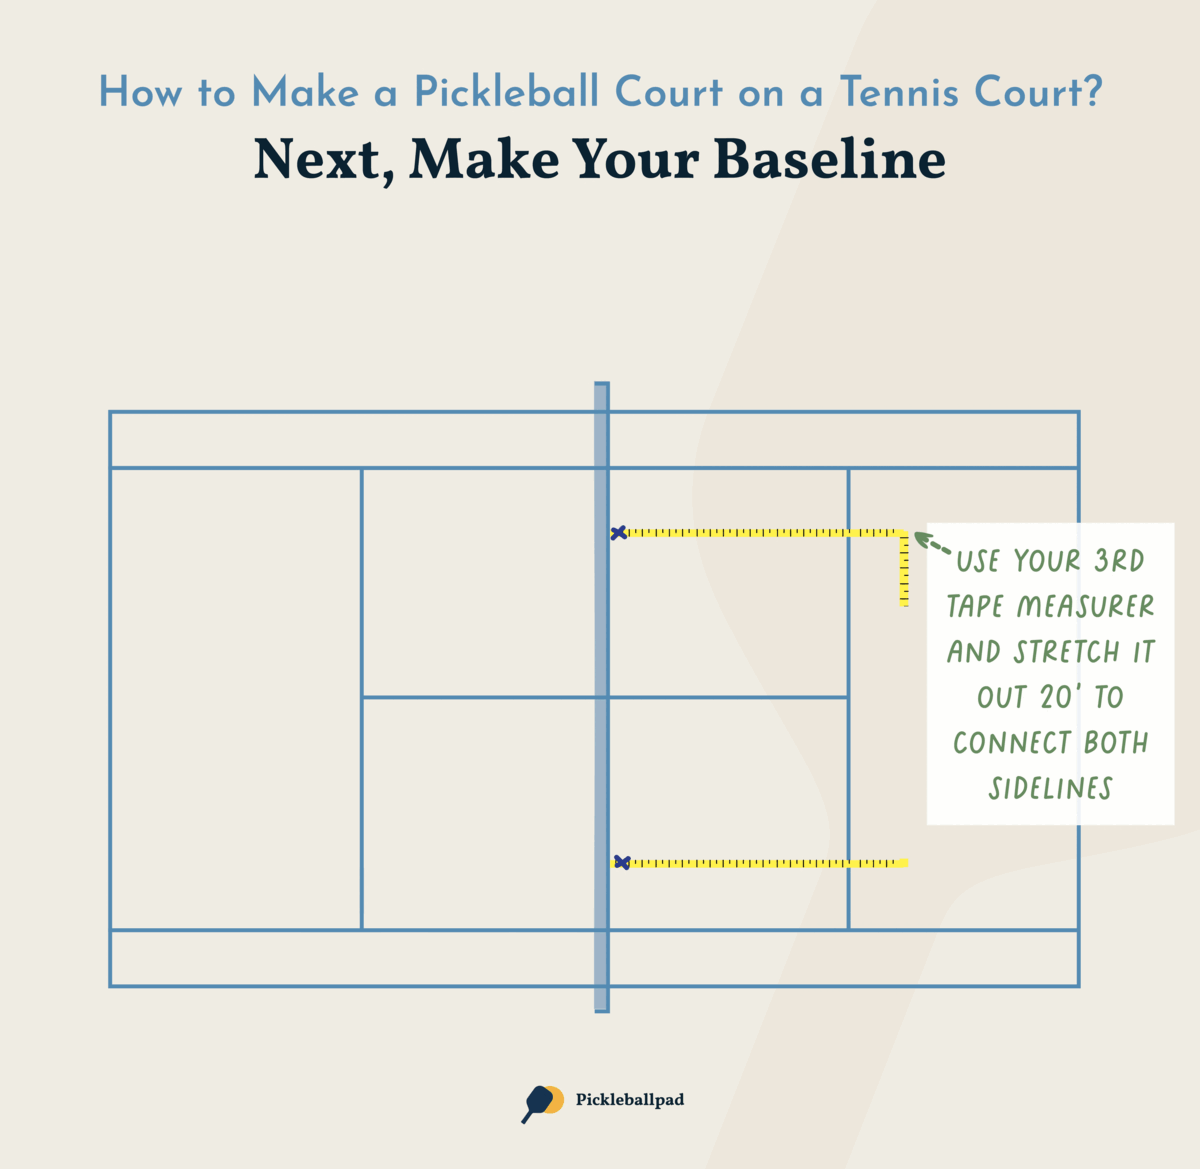 How to measure a baseline for pickleball on a tennis court.